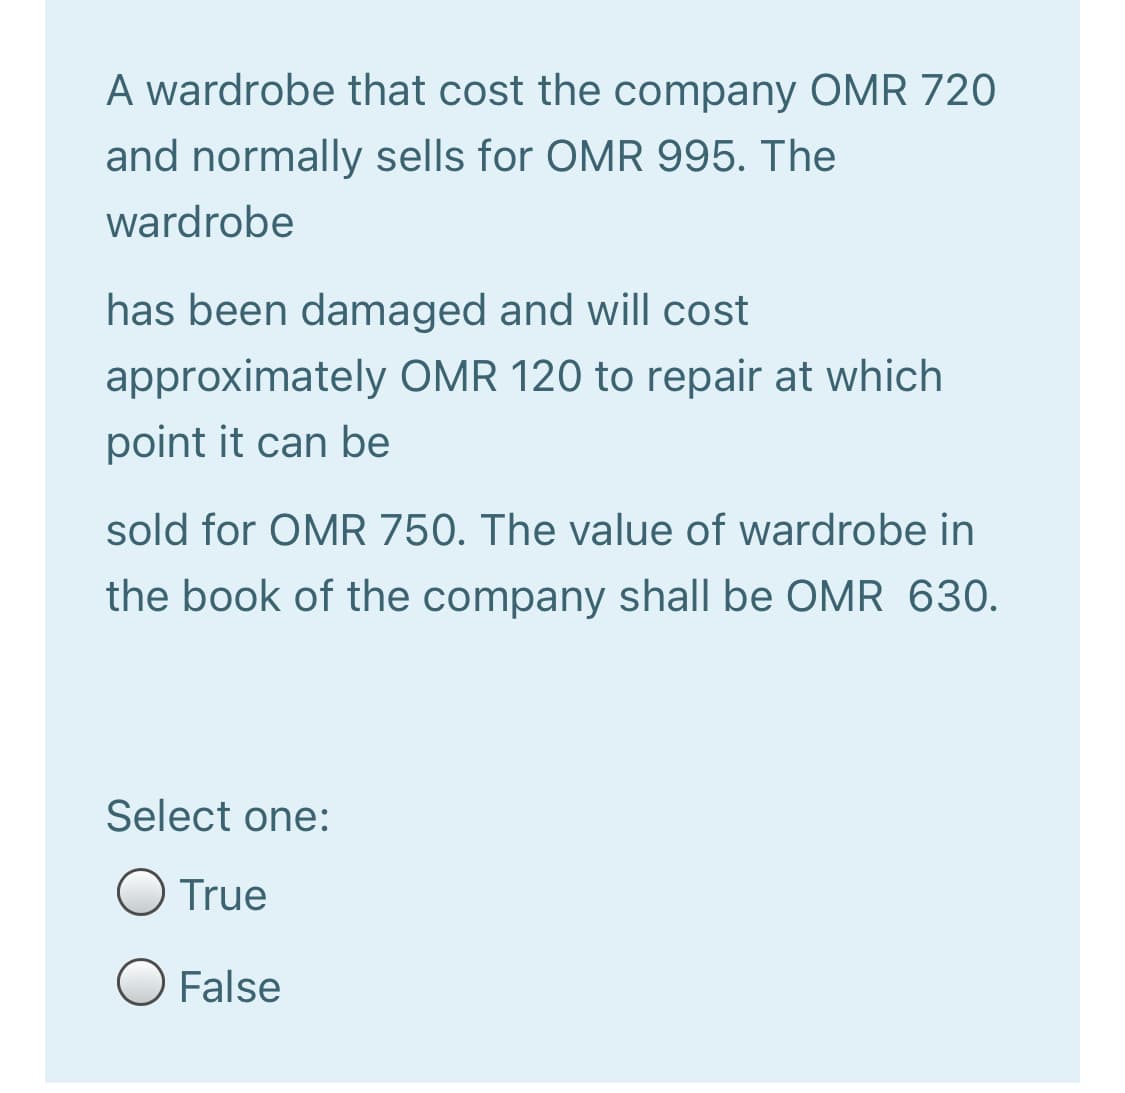 A wardrobe that cost the company OMR 720
and normally sells for OMR 995. The
wardrobe
has been damaged and will cost
approximately OMR 120 to repair at which
point it can be
sold for OMR 750. The value of wardrobe in
the book of the company shall be OMR 630.
Select one:
True
O False
